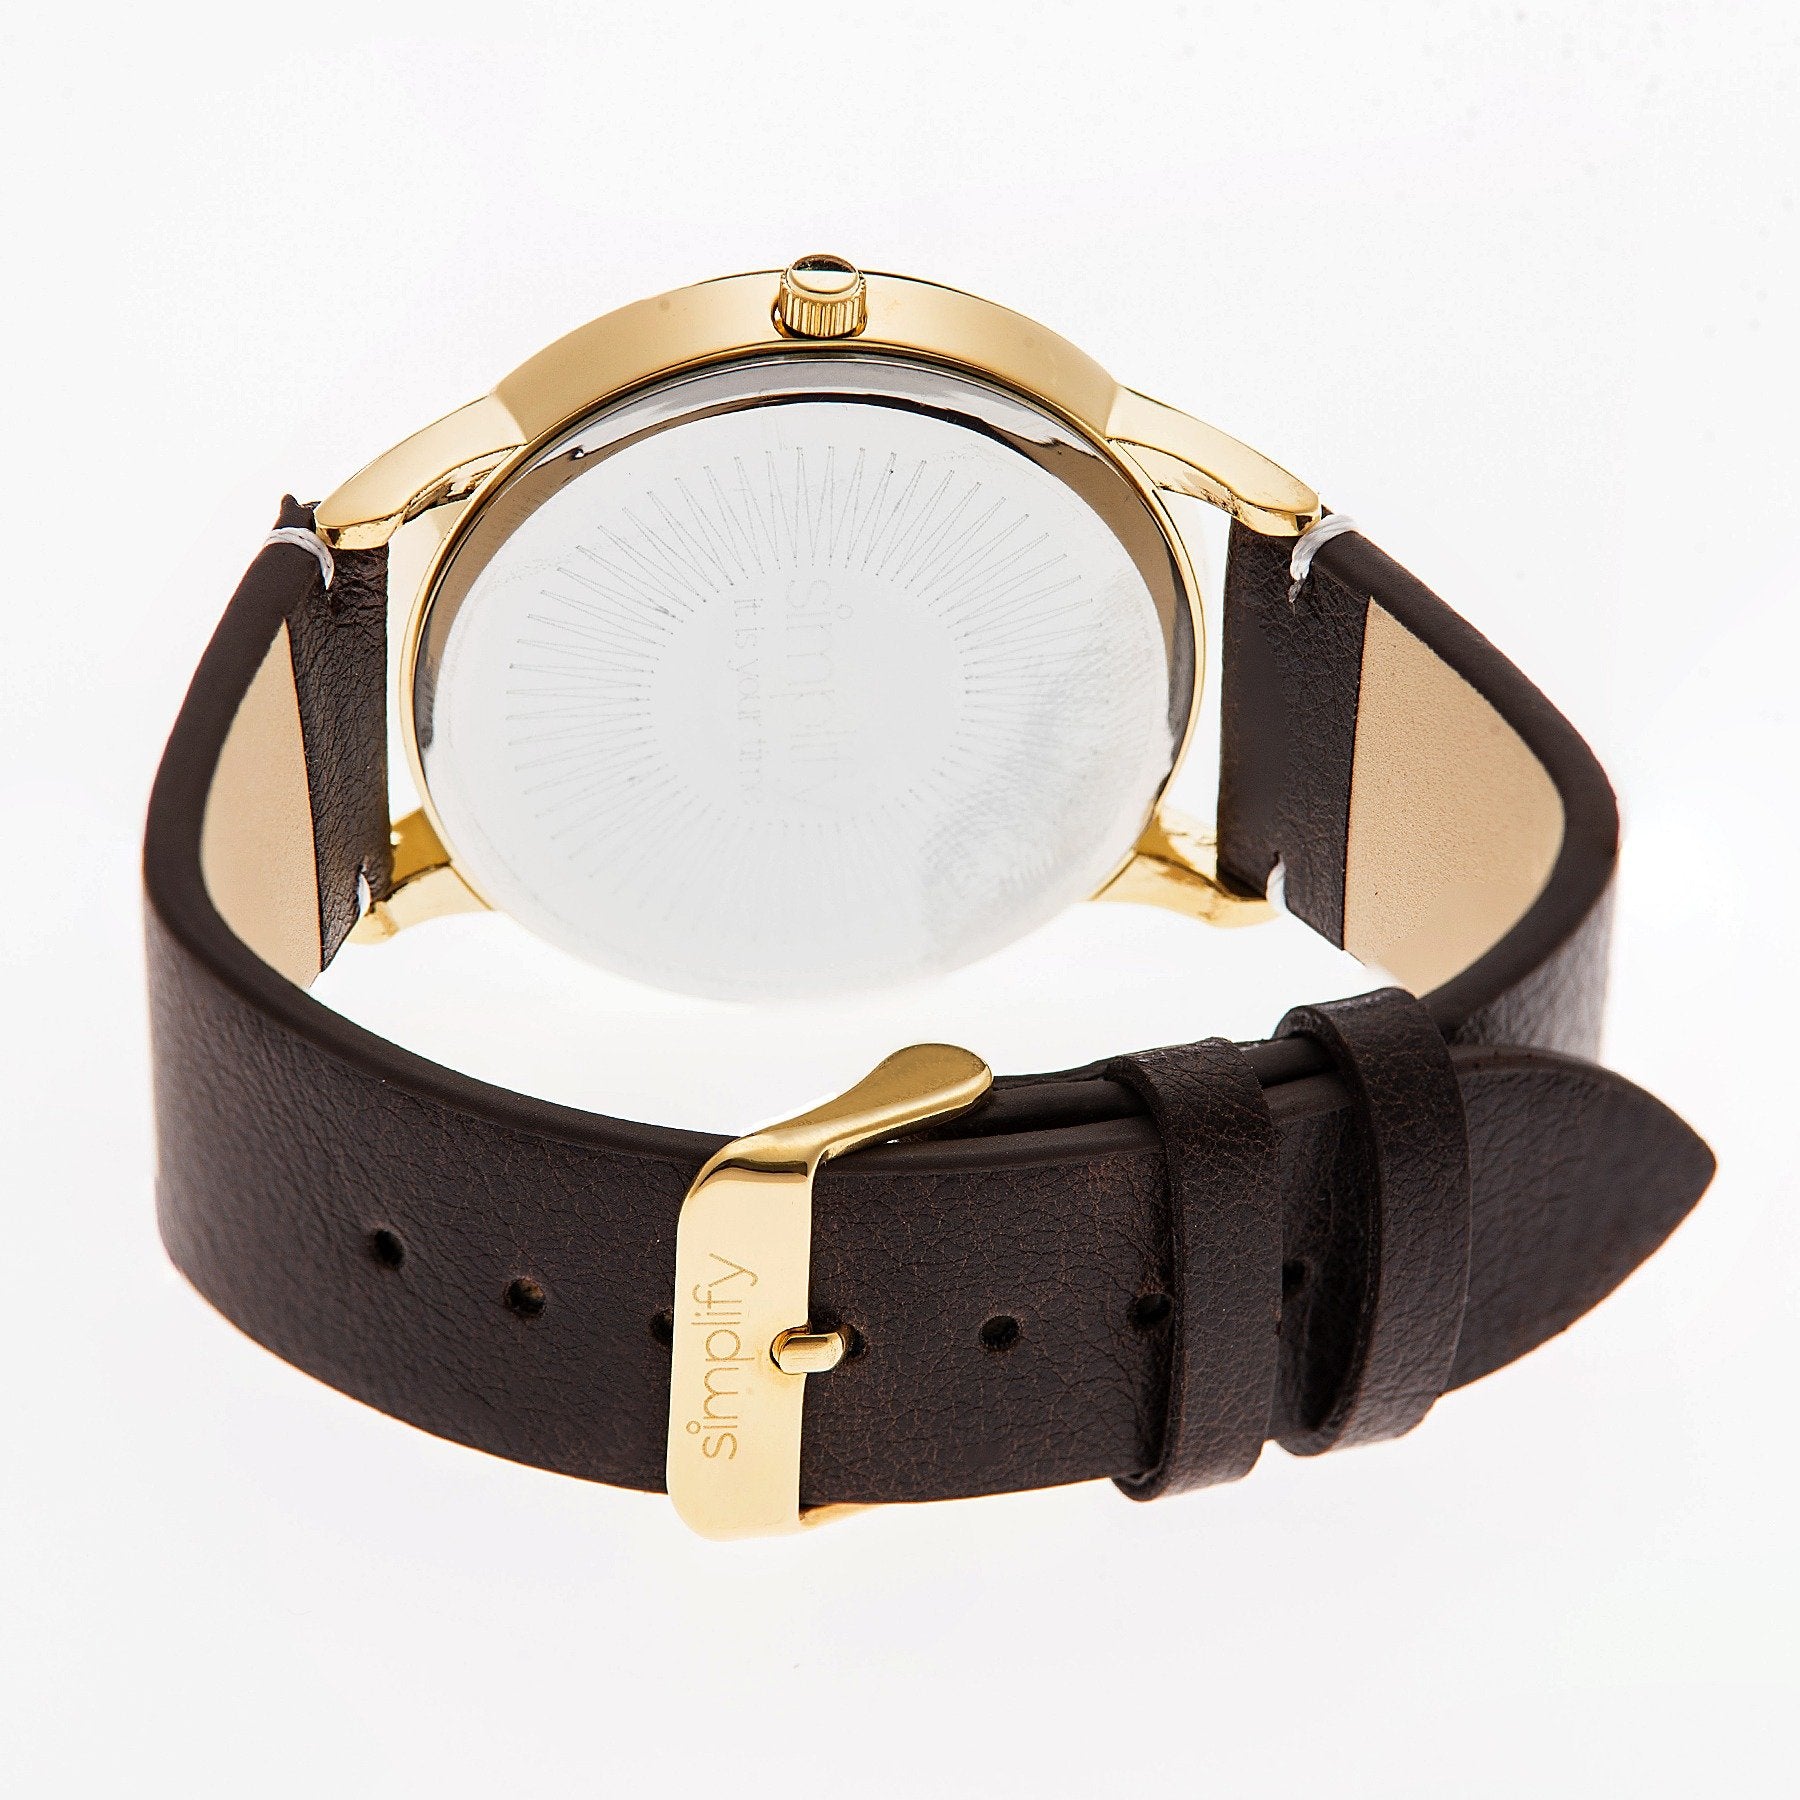 Simplify The 2800 Leather-Band Watch - Gold/Dark Brown - SIM2805